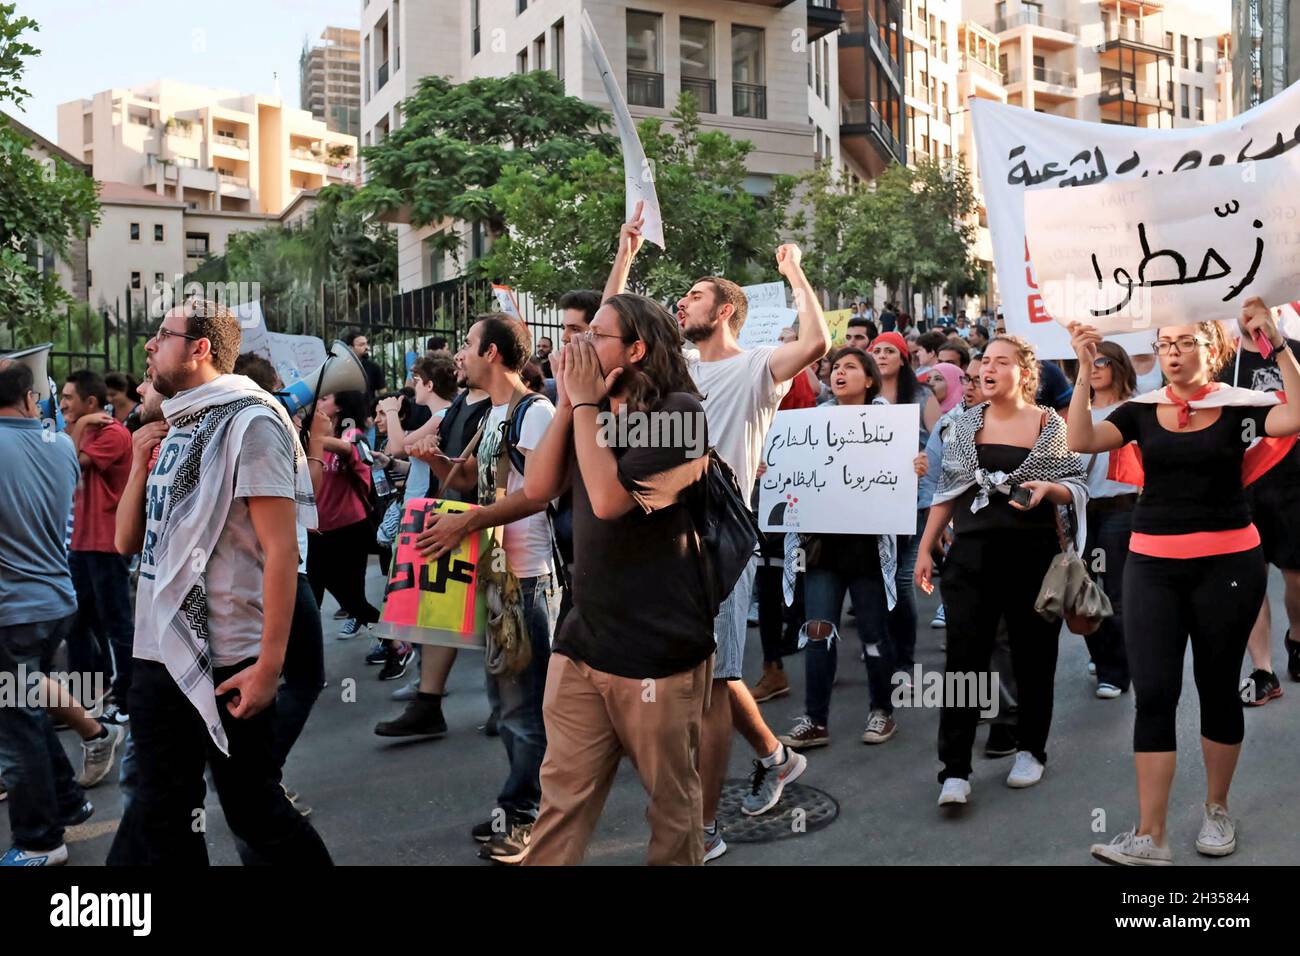 Protesters march through the streets of Beirut, Lebanon, a common scene due to the rampant government corruption. Stock Photo